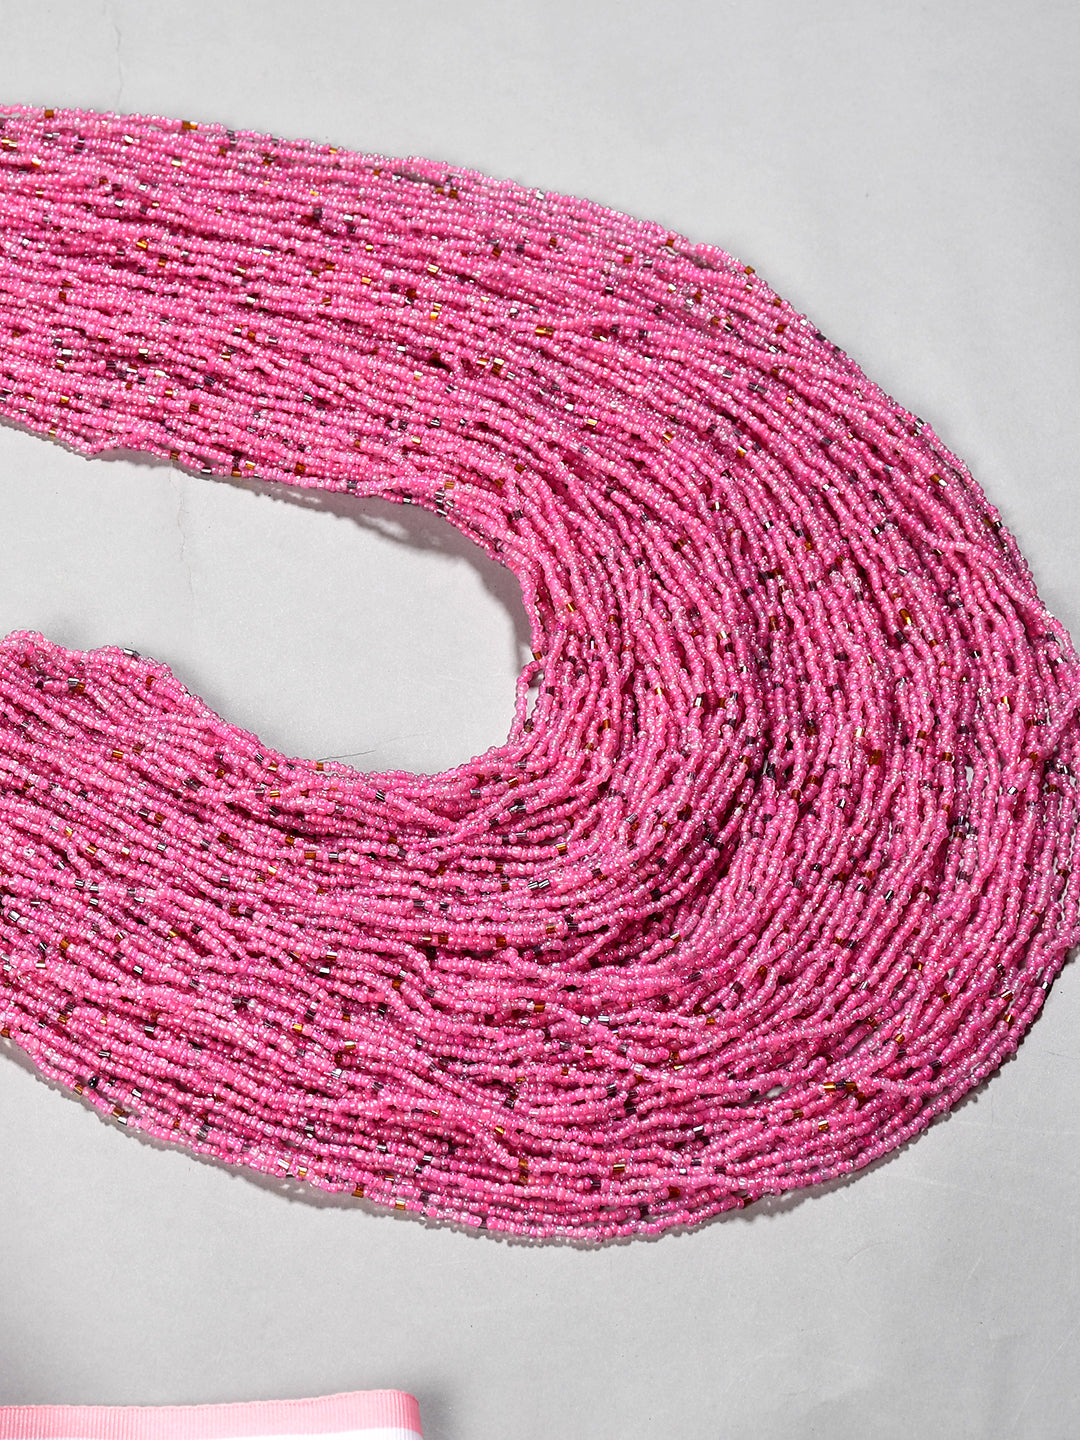 Handcrafted Pink Beads Necklace by Bamboo Tree Jewels